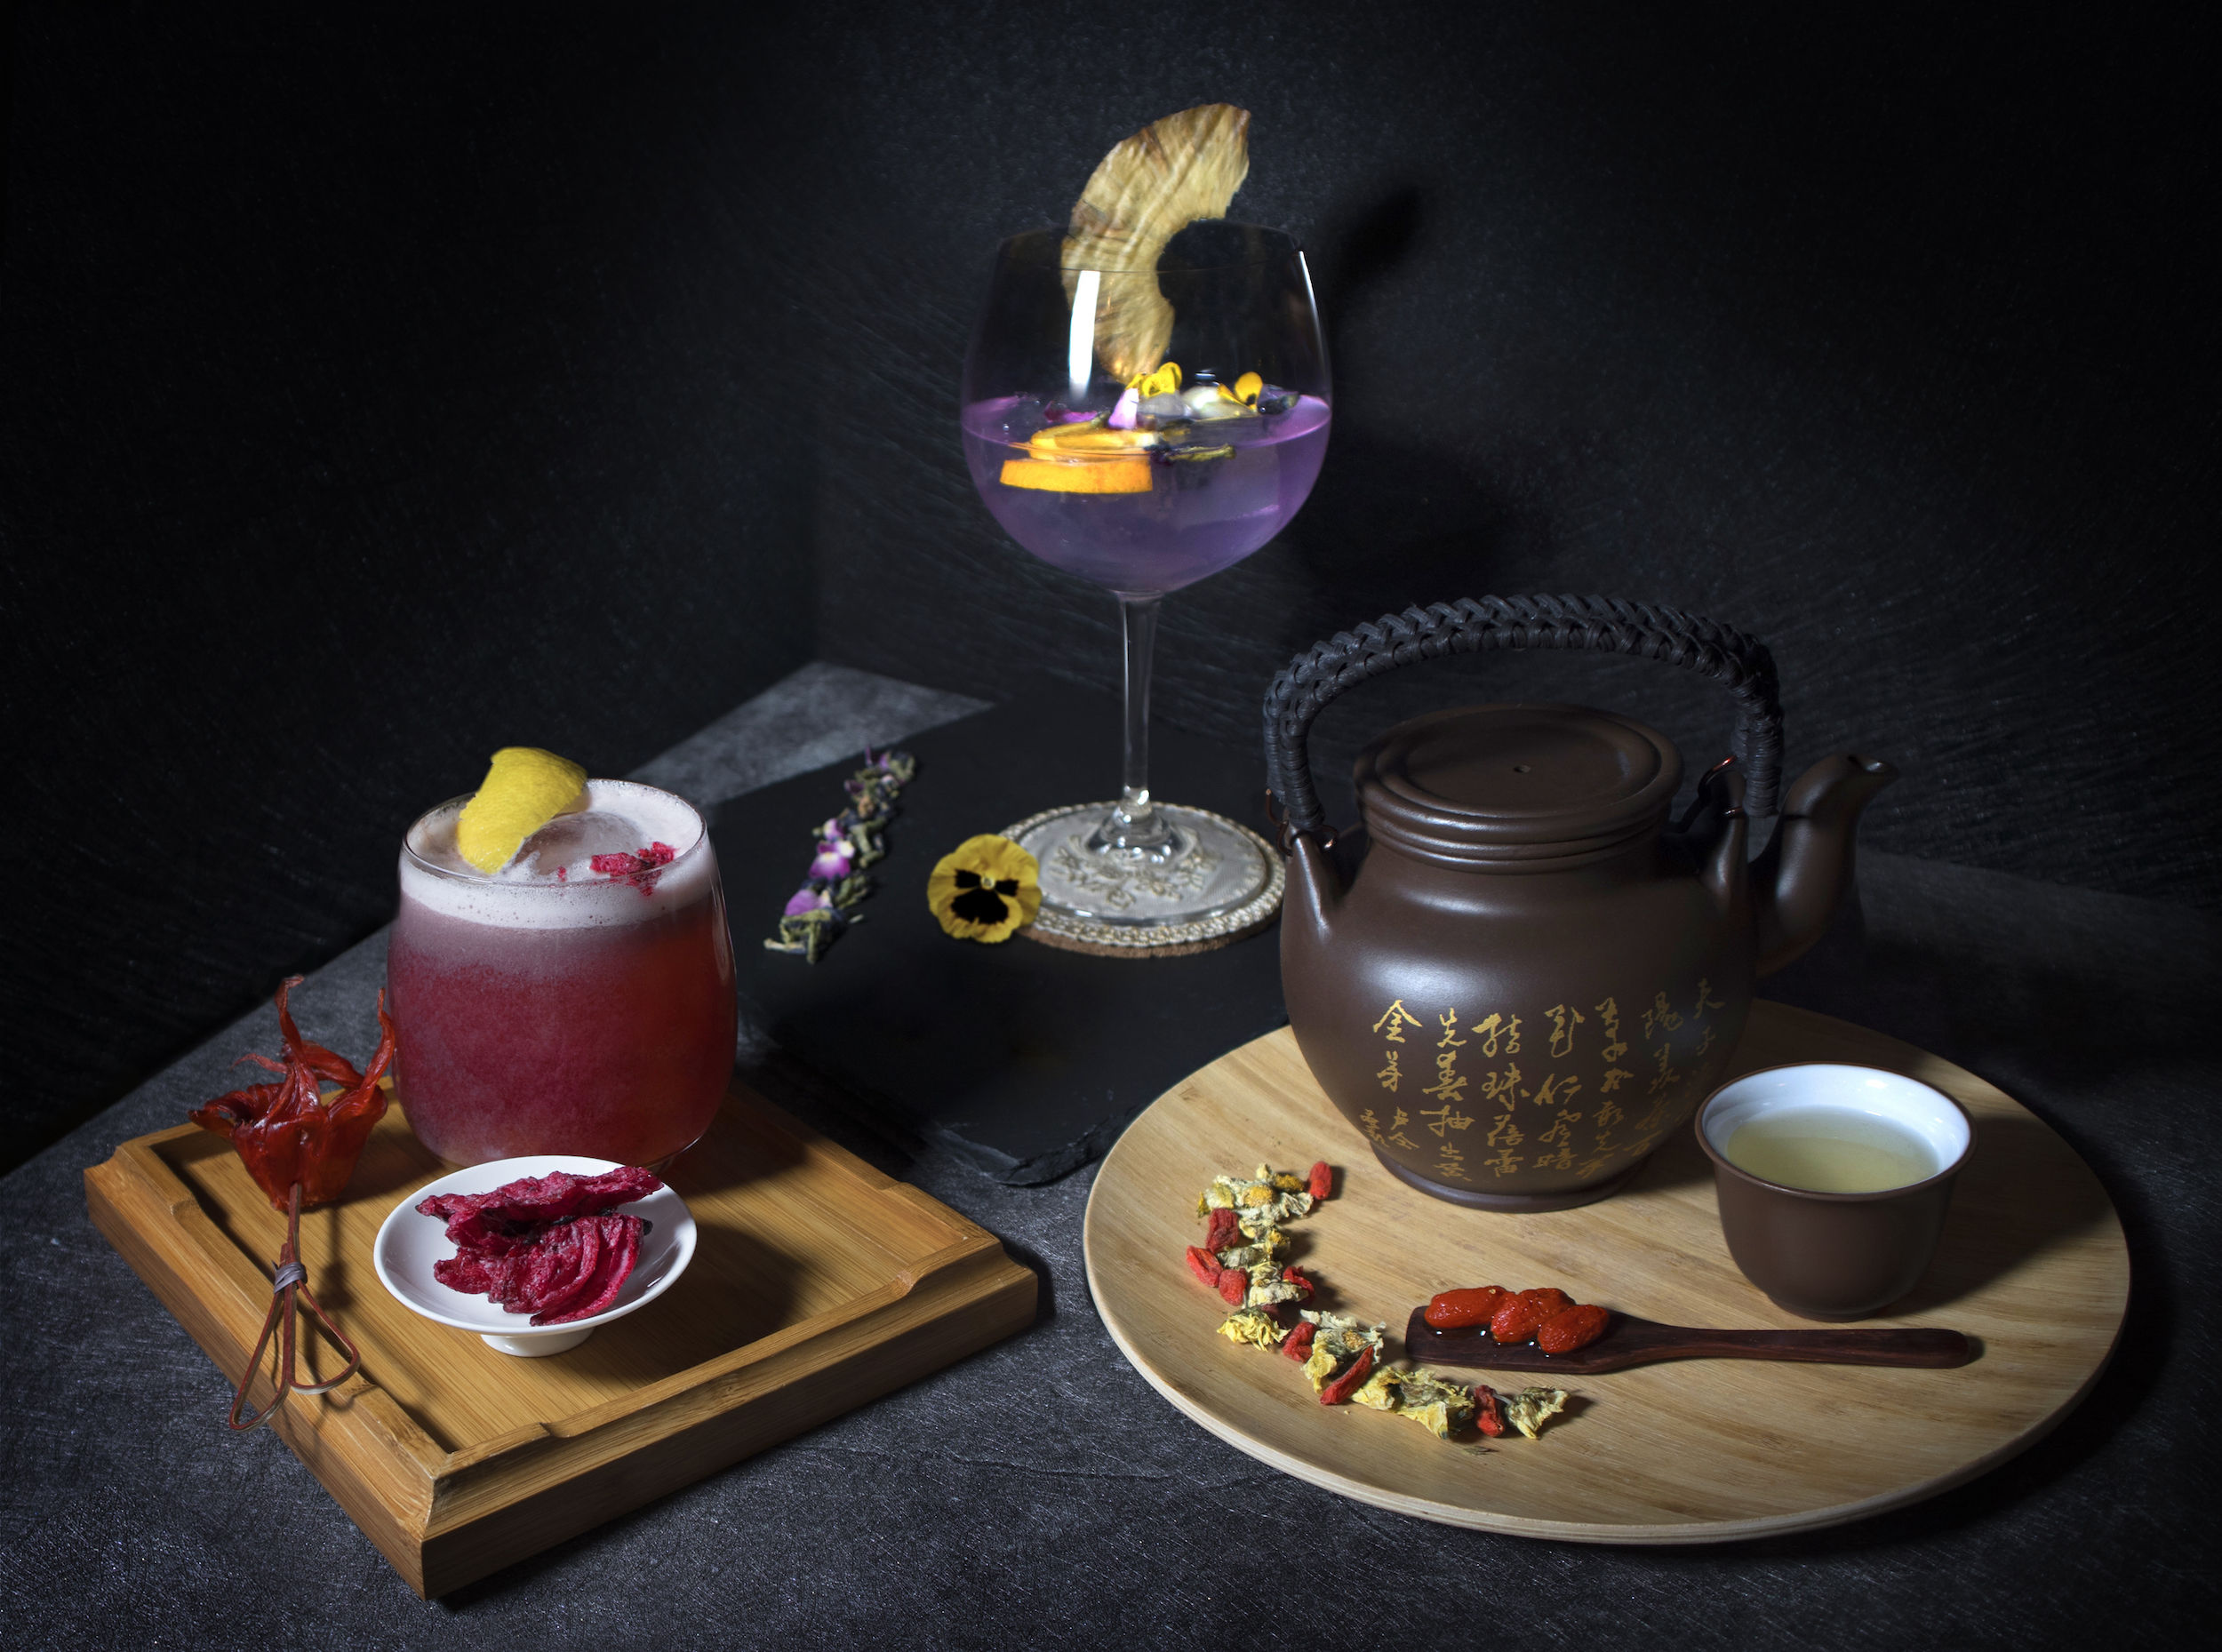 Spring arrives at China Tang with refreshing herbal tea cocktails